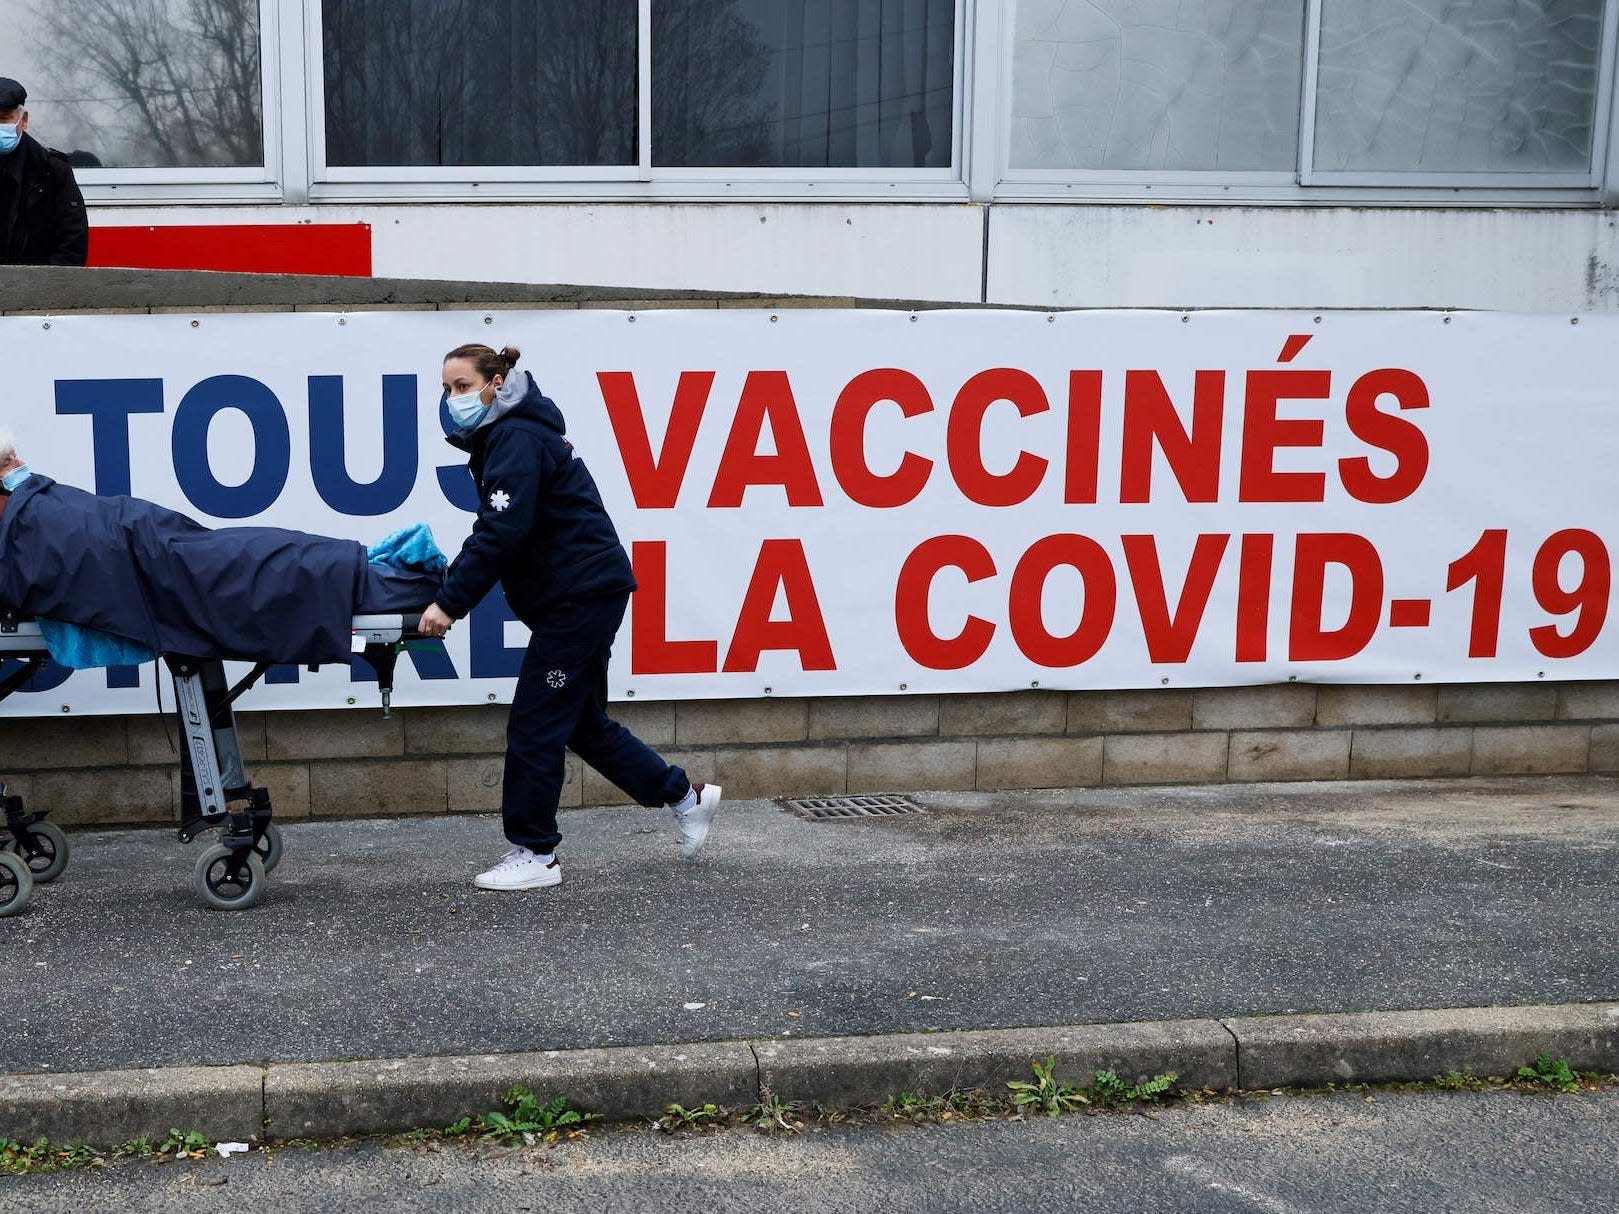 France admits that it needs to repair the image of AstraZeneca’s COVID-19 vaccine after fighting to convince people to take it